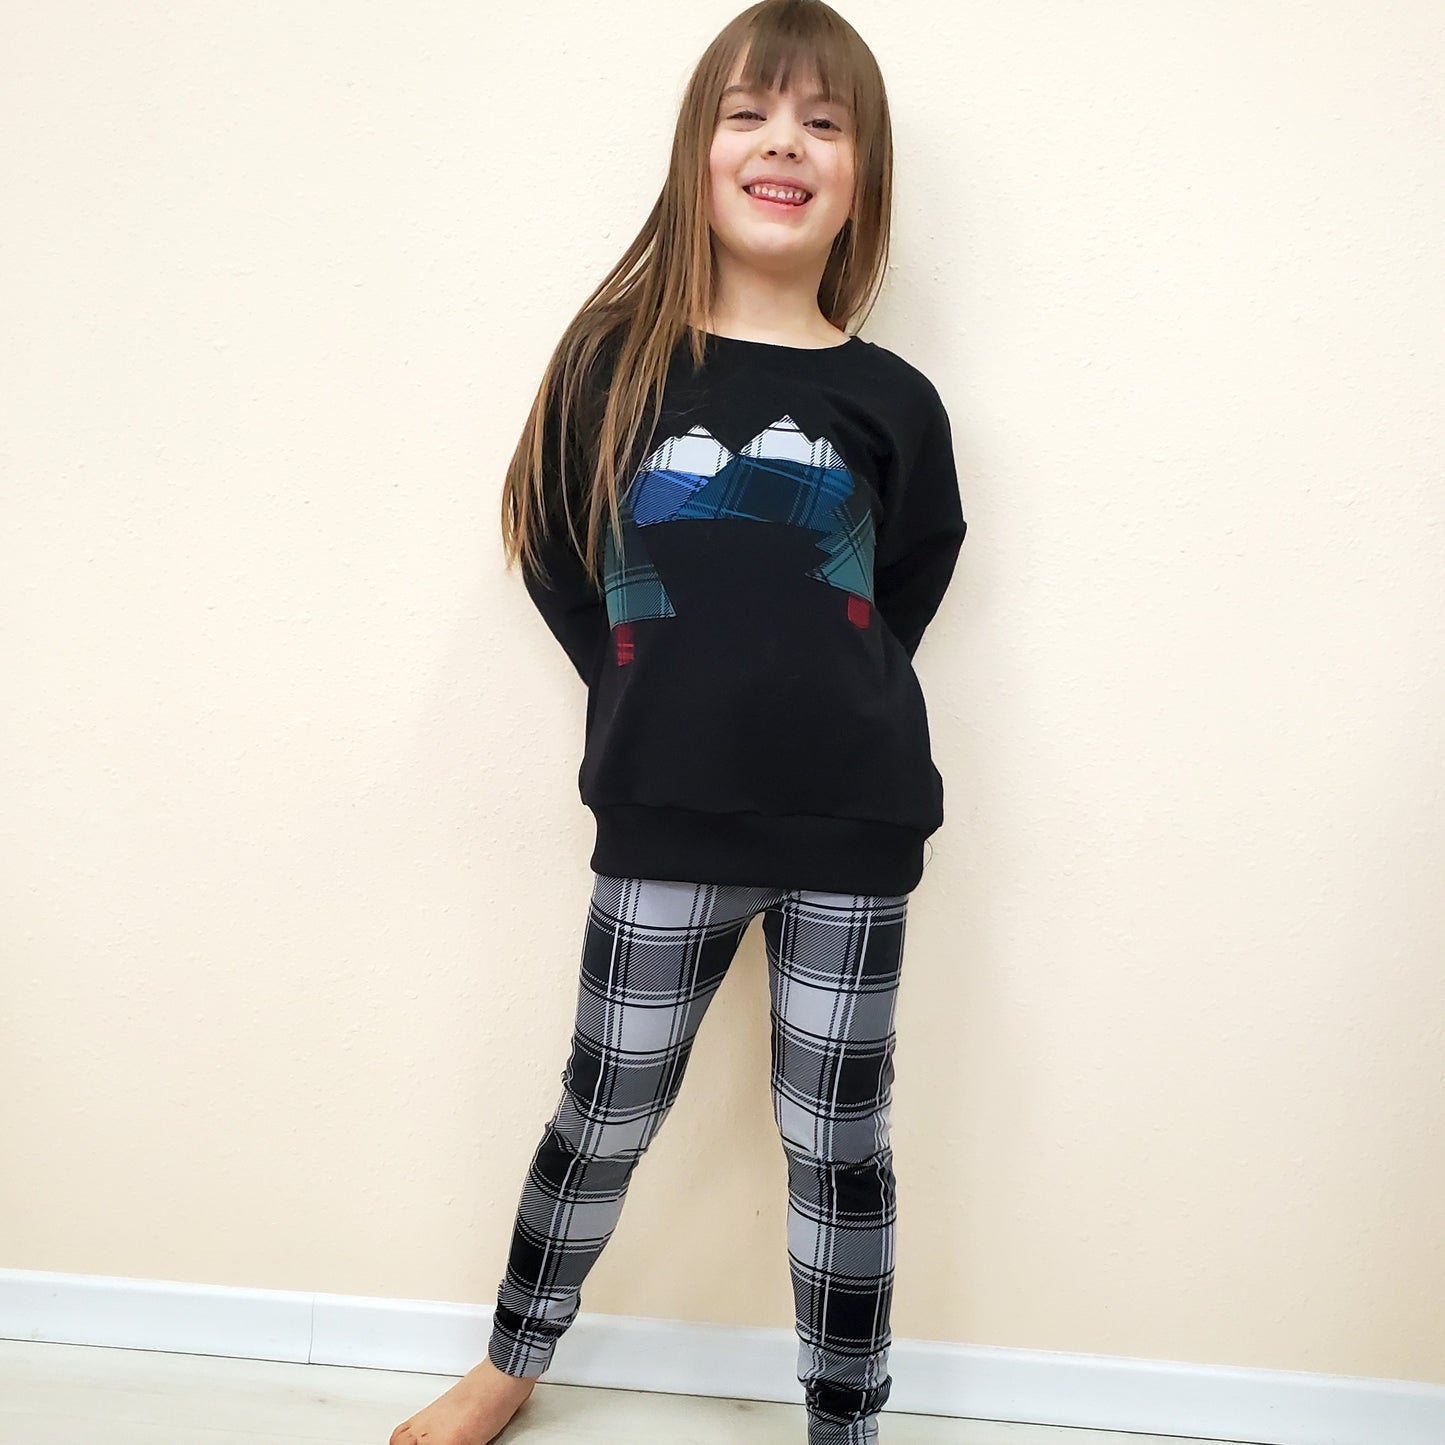 Plaid Leggings and Skirts for Children in Organic Cotton